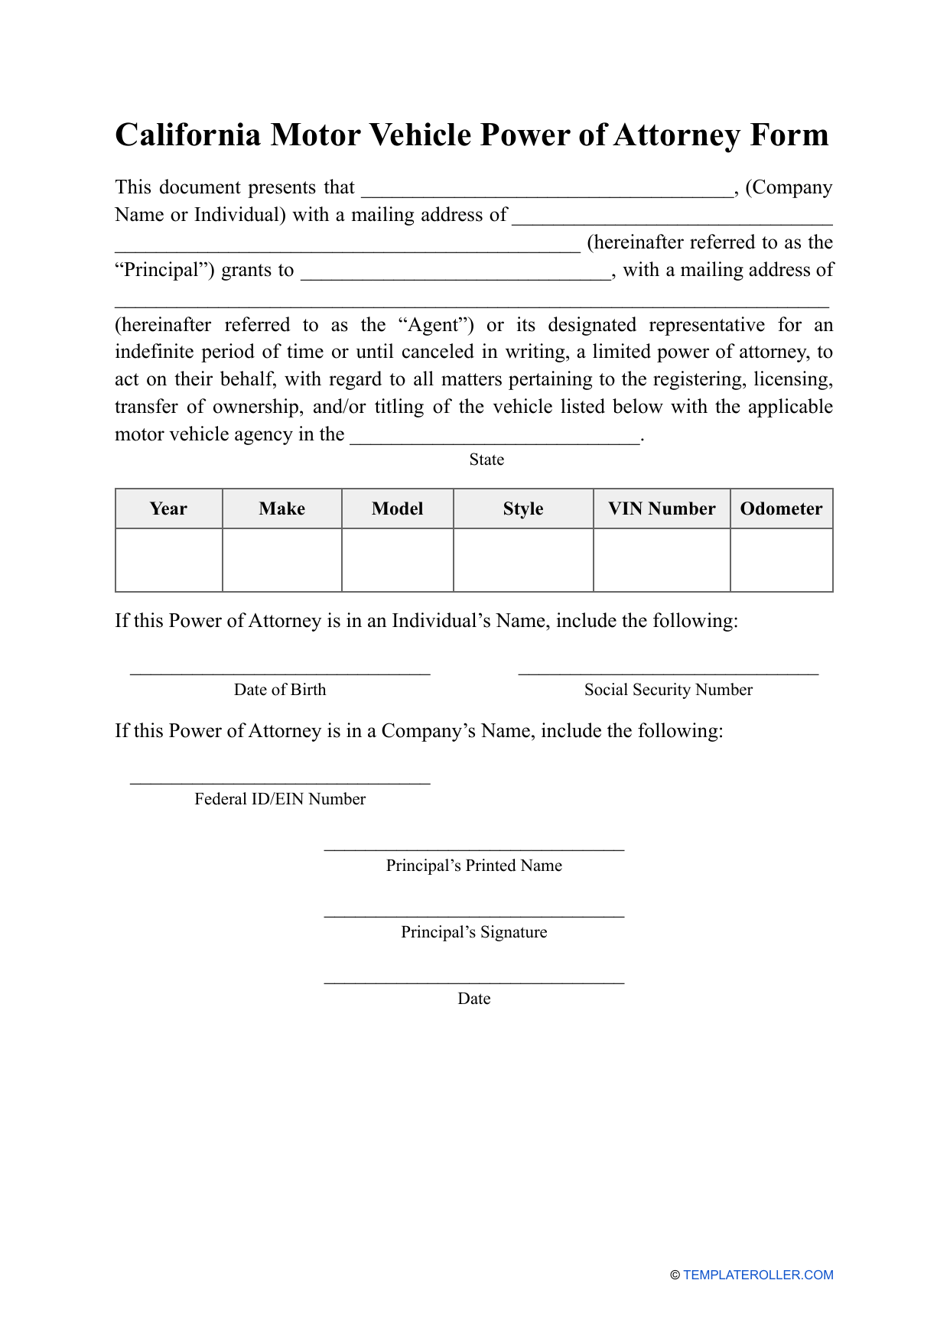 Motor Vehicle Power of Attorney Form - California, Page 1